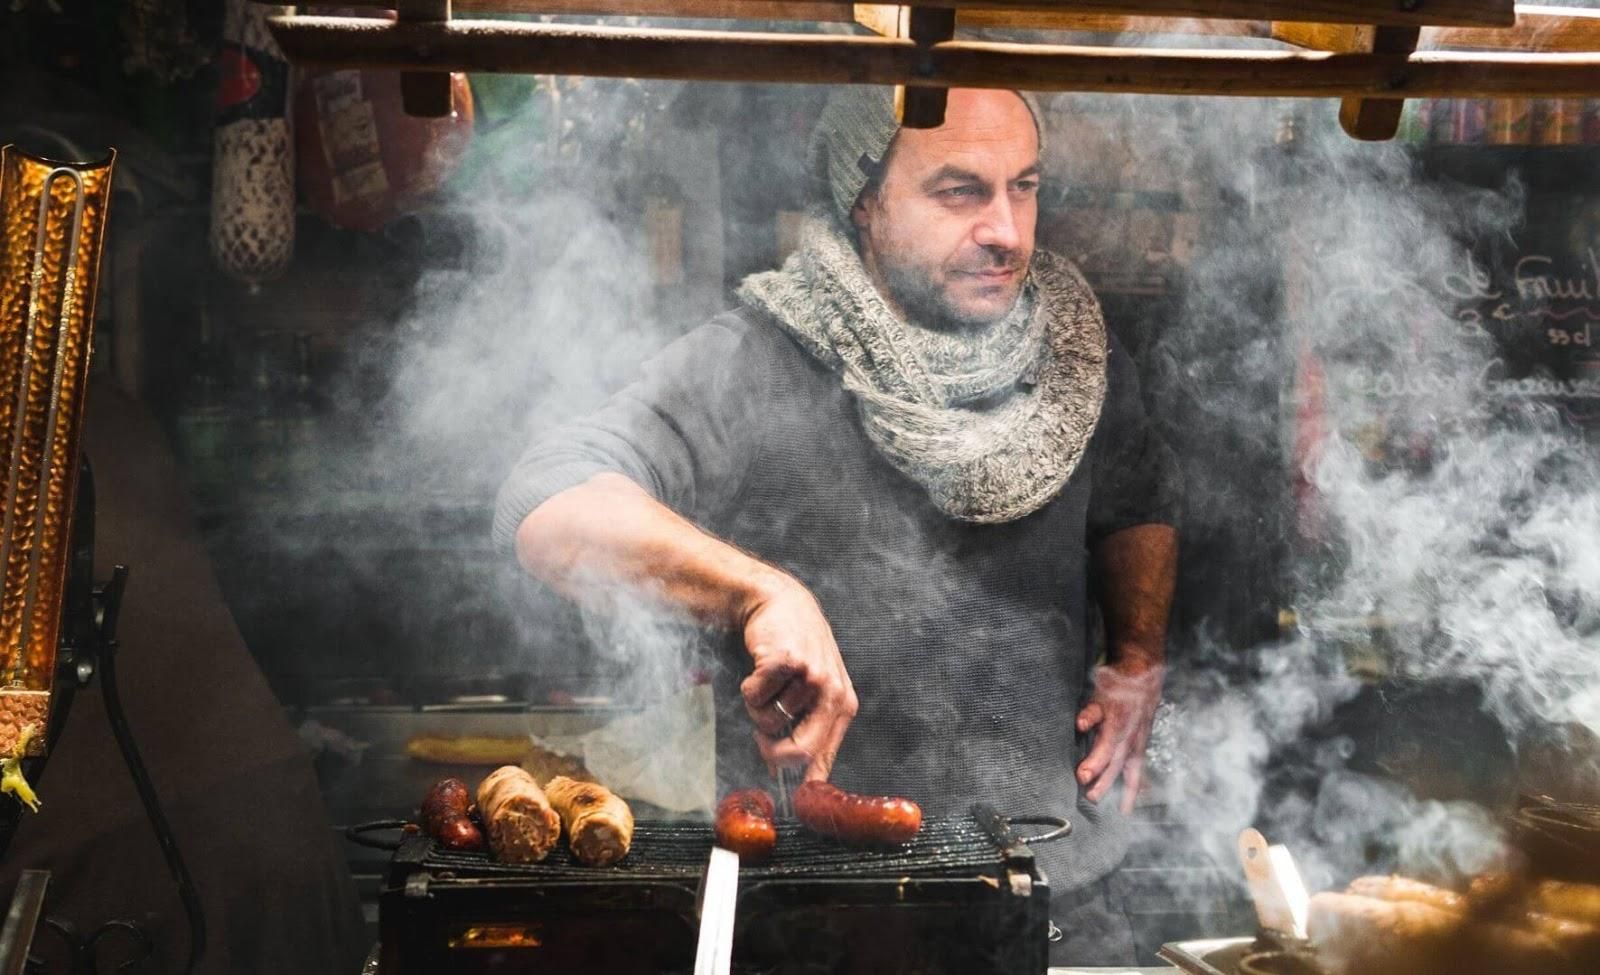 Picture of a man grilling sausages in an outdoor Christmas market